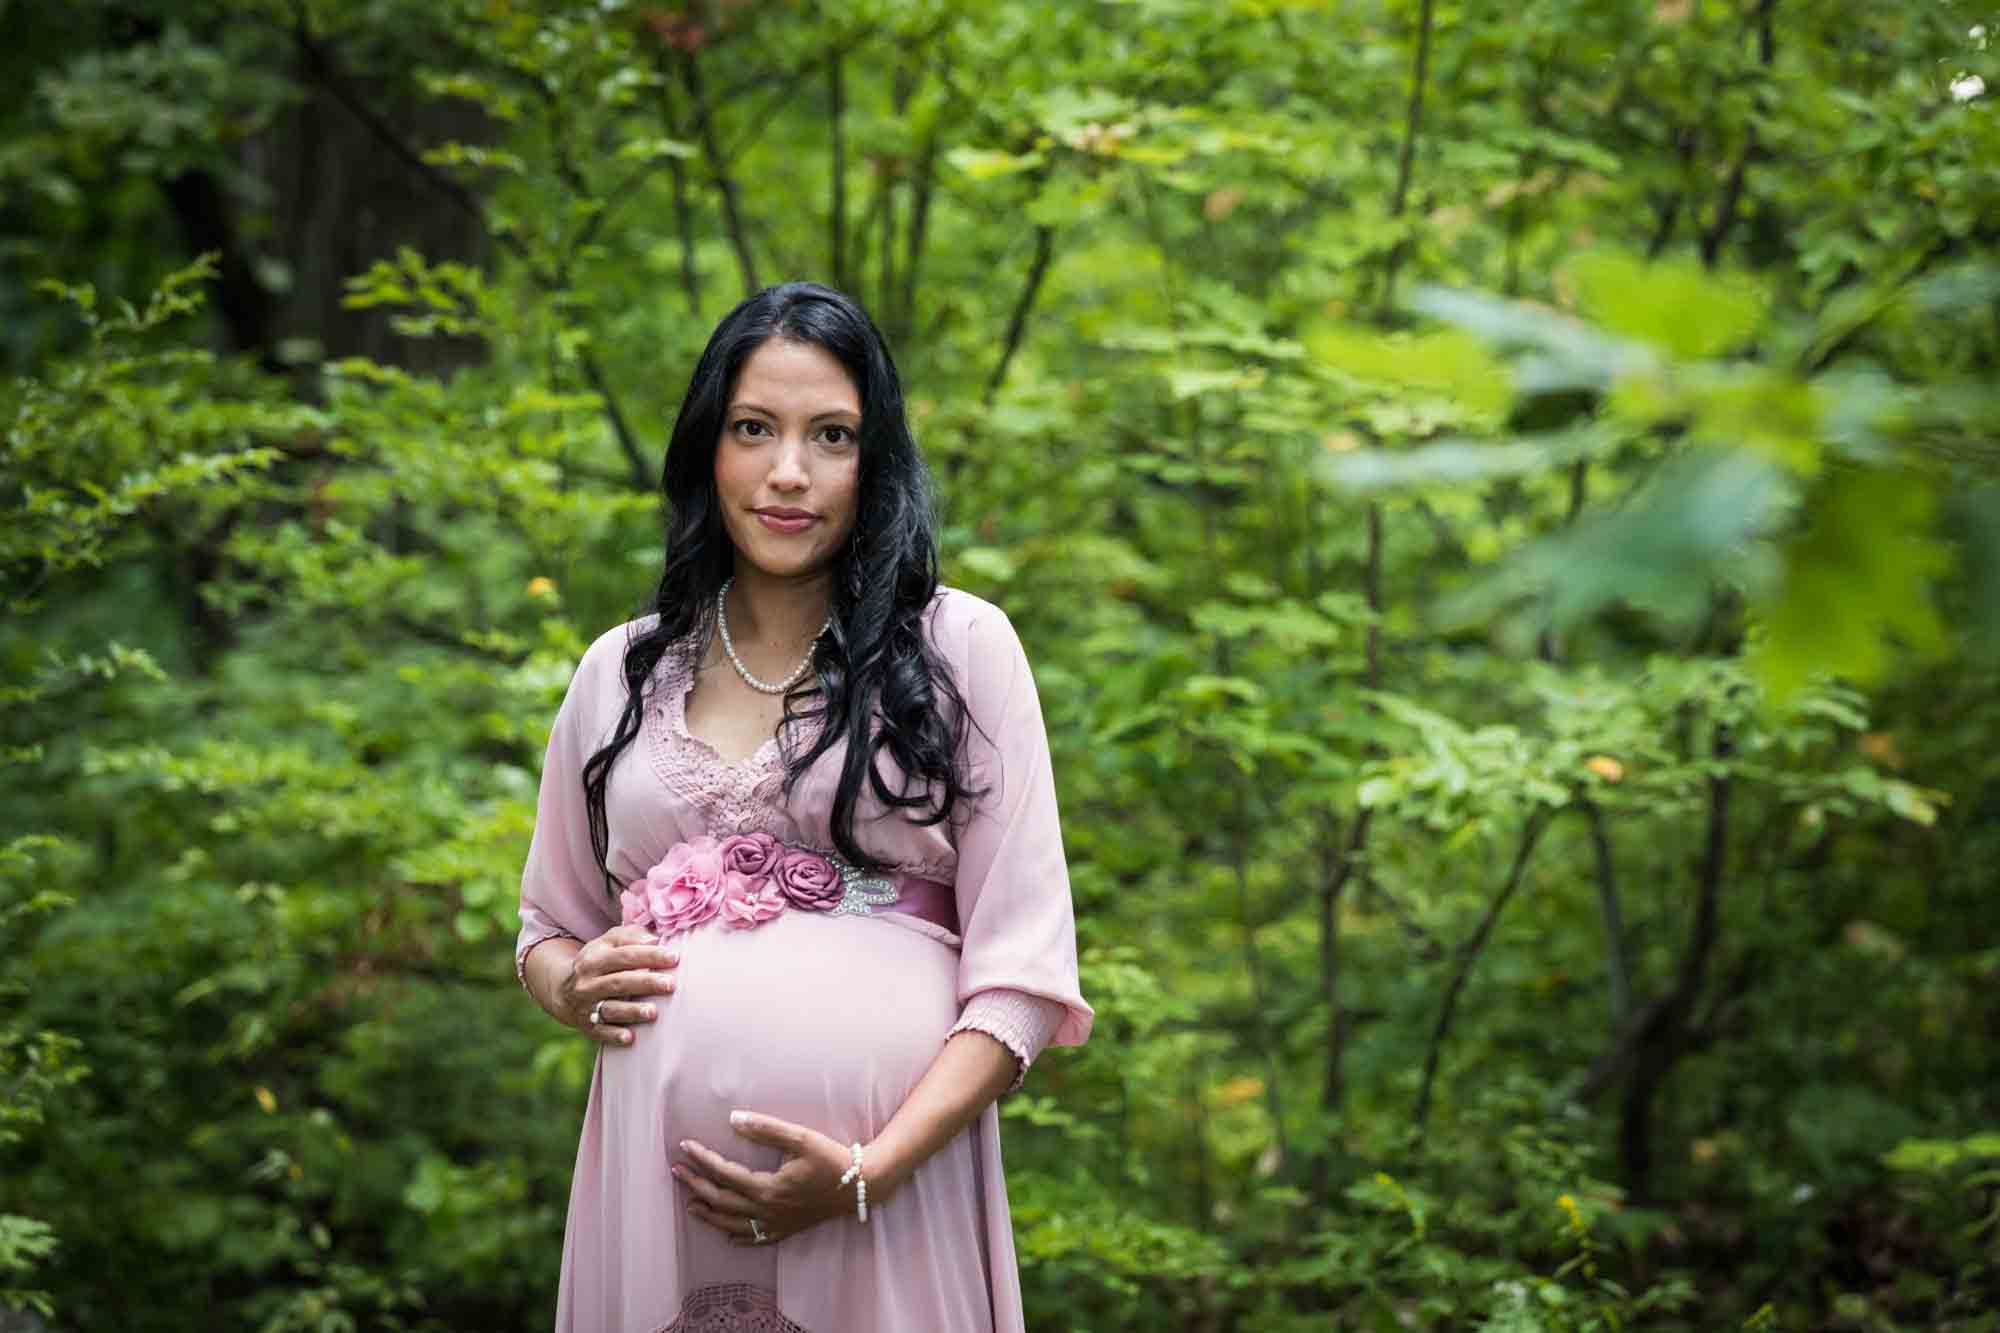 Forest Park maternity photos of a woman with brown hair wearing a pink dress in a forest